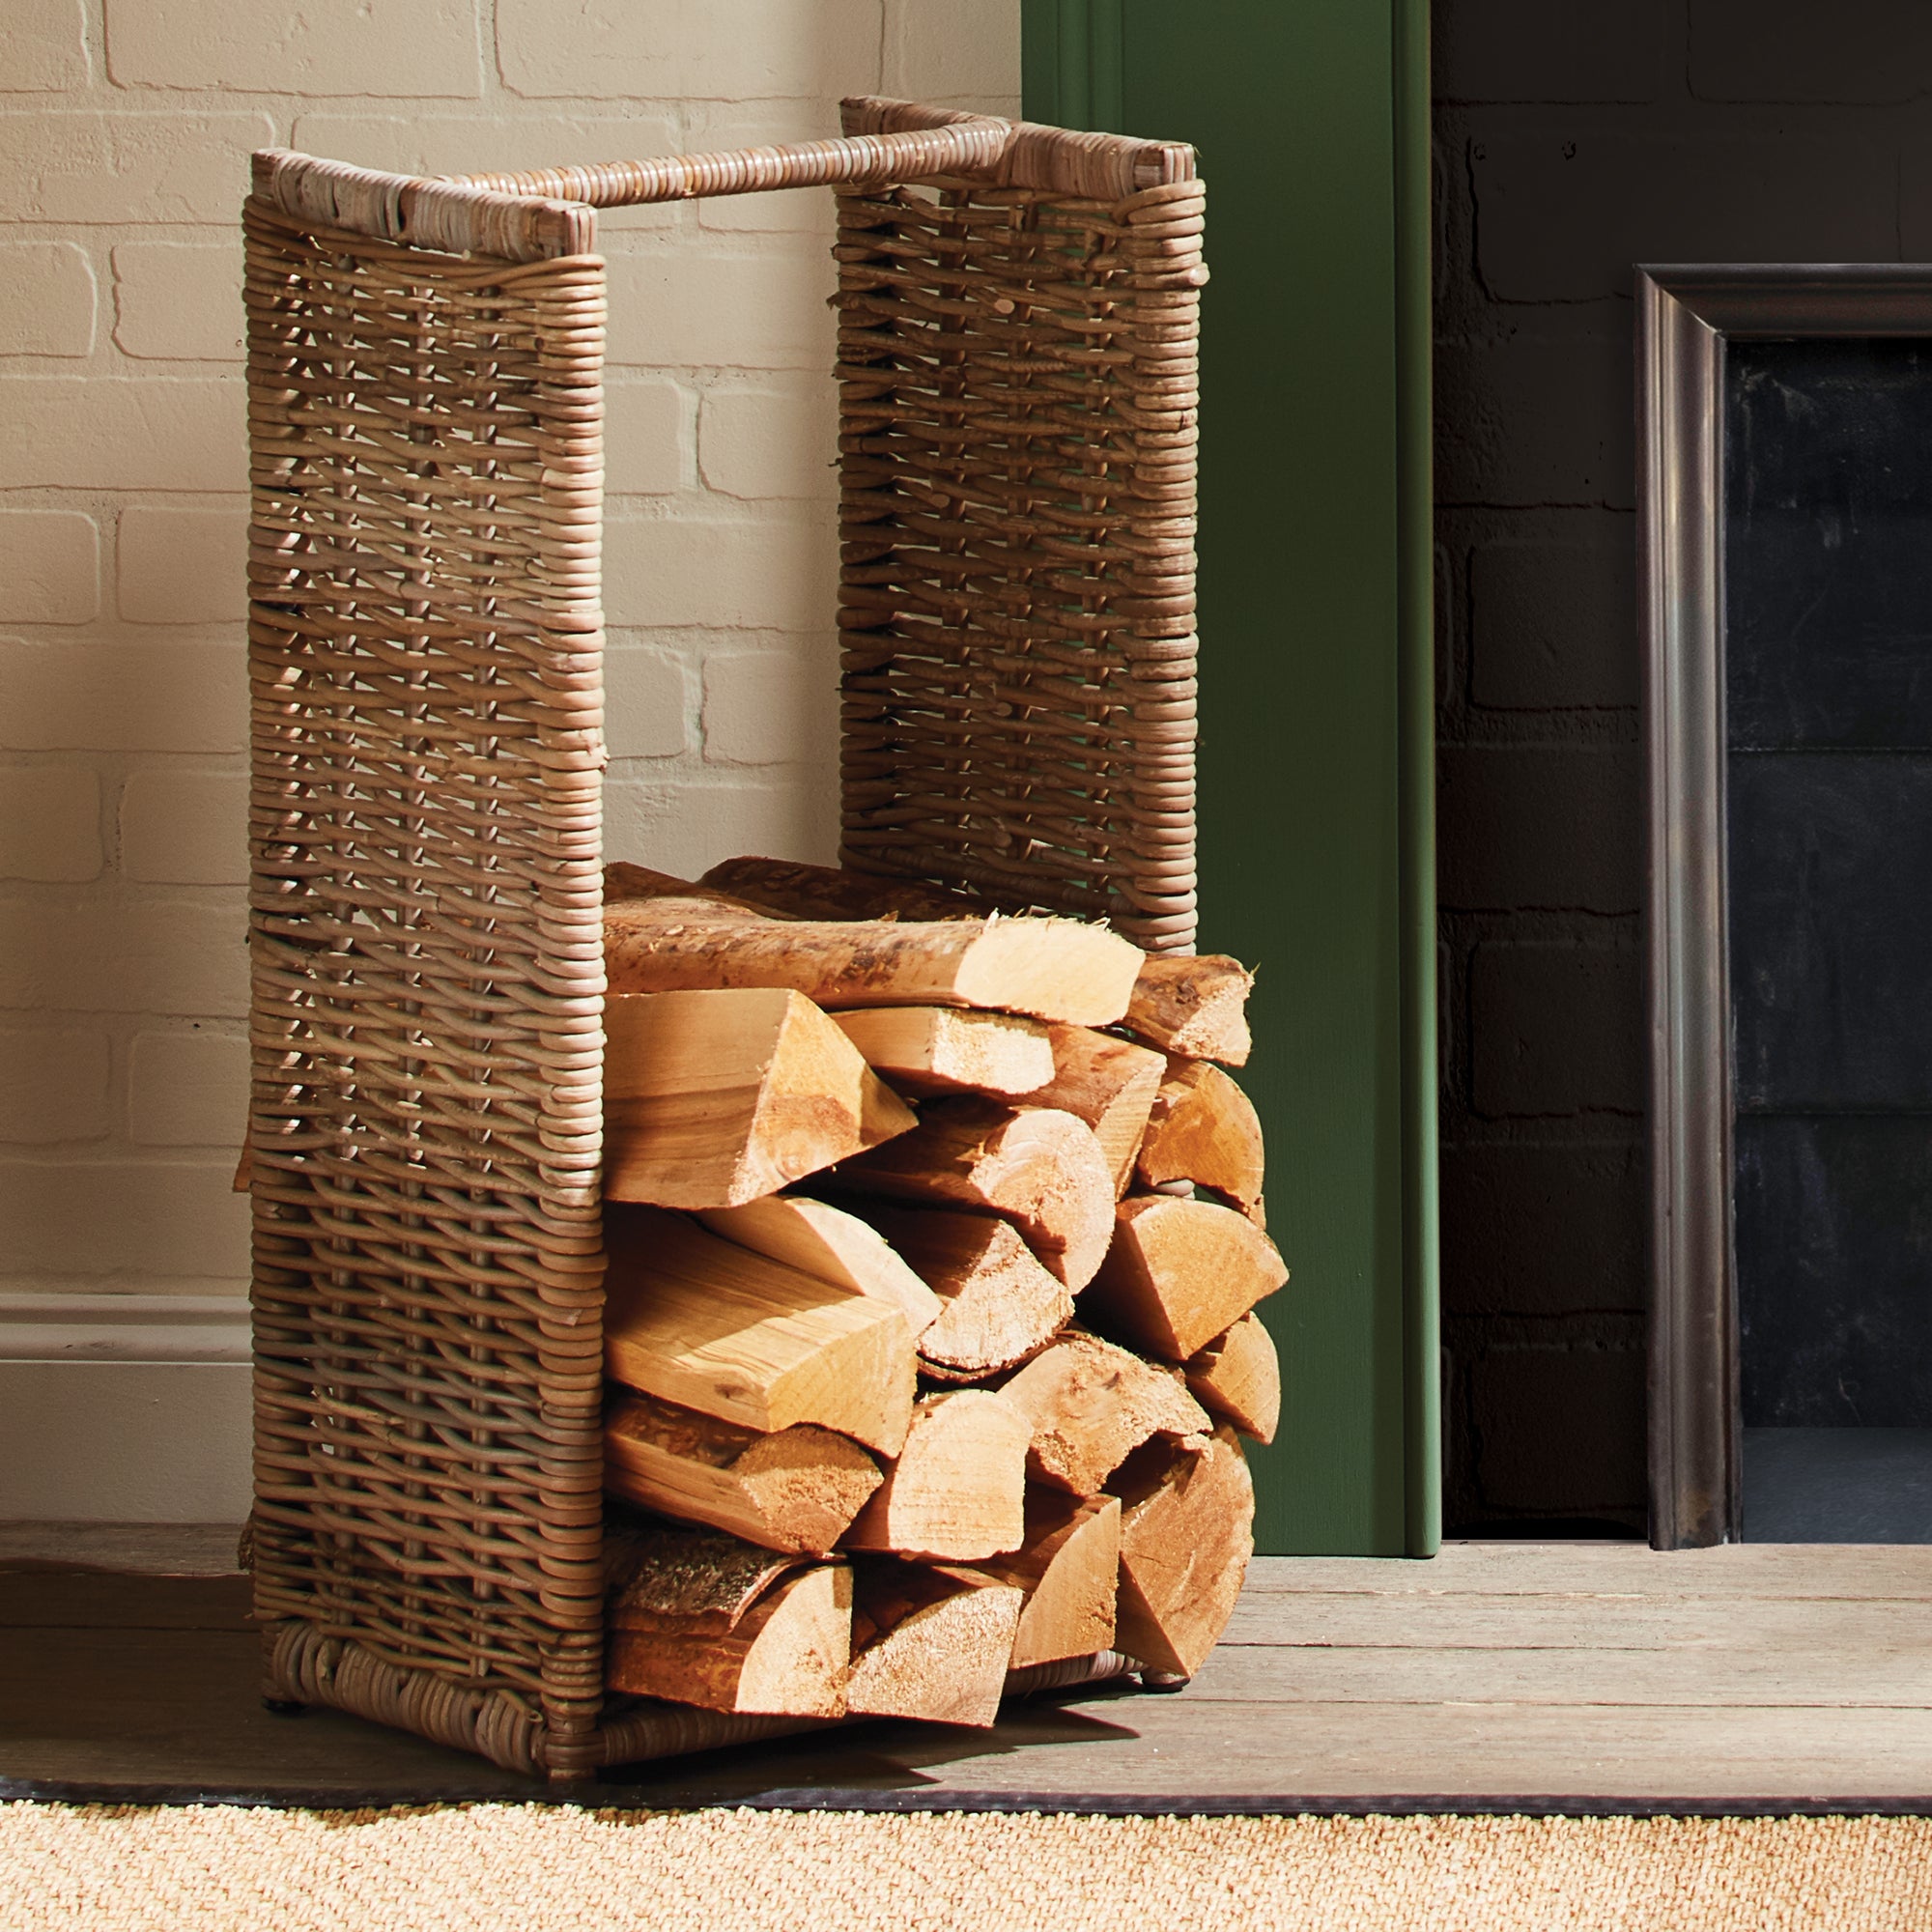 The tall, structured shape of this basket is ideal for the stack of painstakingly chopped wood logs. Place next to the hearth for a stylish, functional accent. Amethyst Home provides interior design, new construction, custom furniture, and area rugs in the Kansas City metro area.